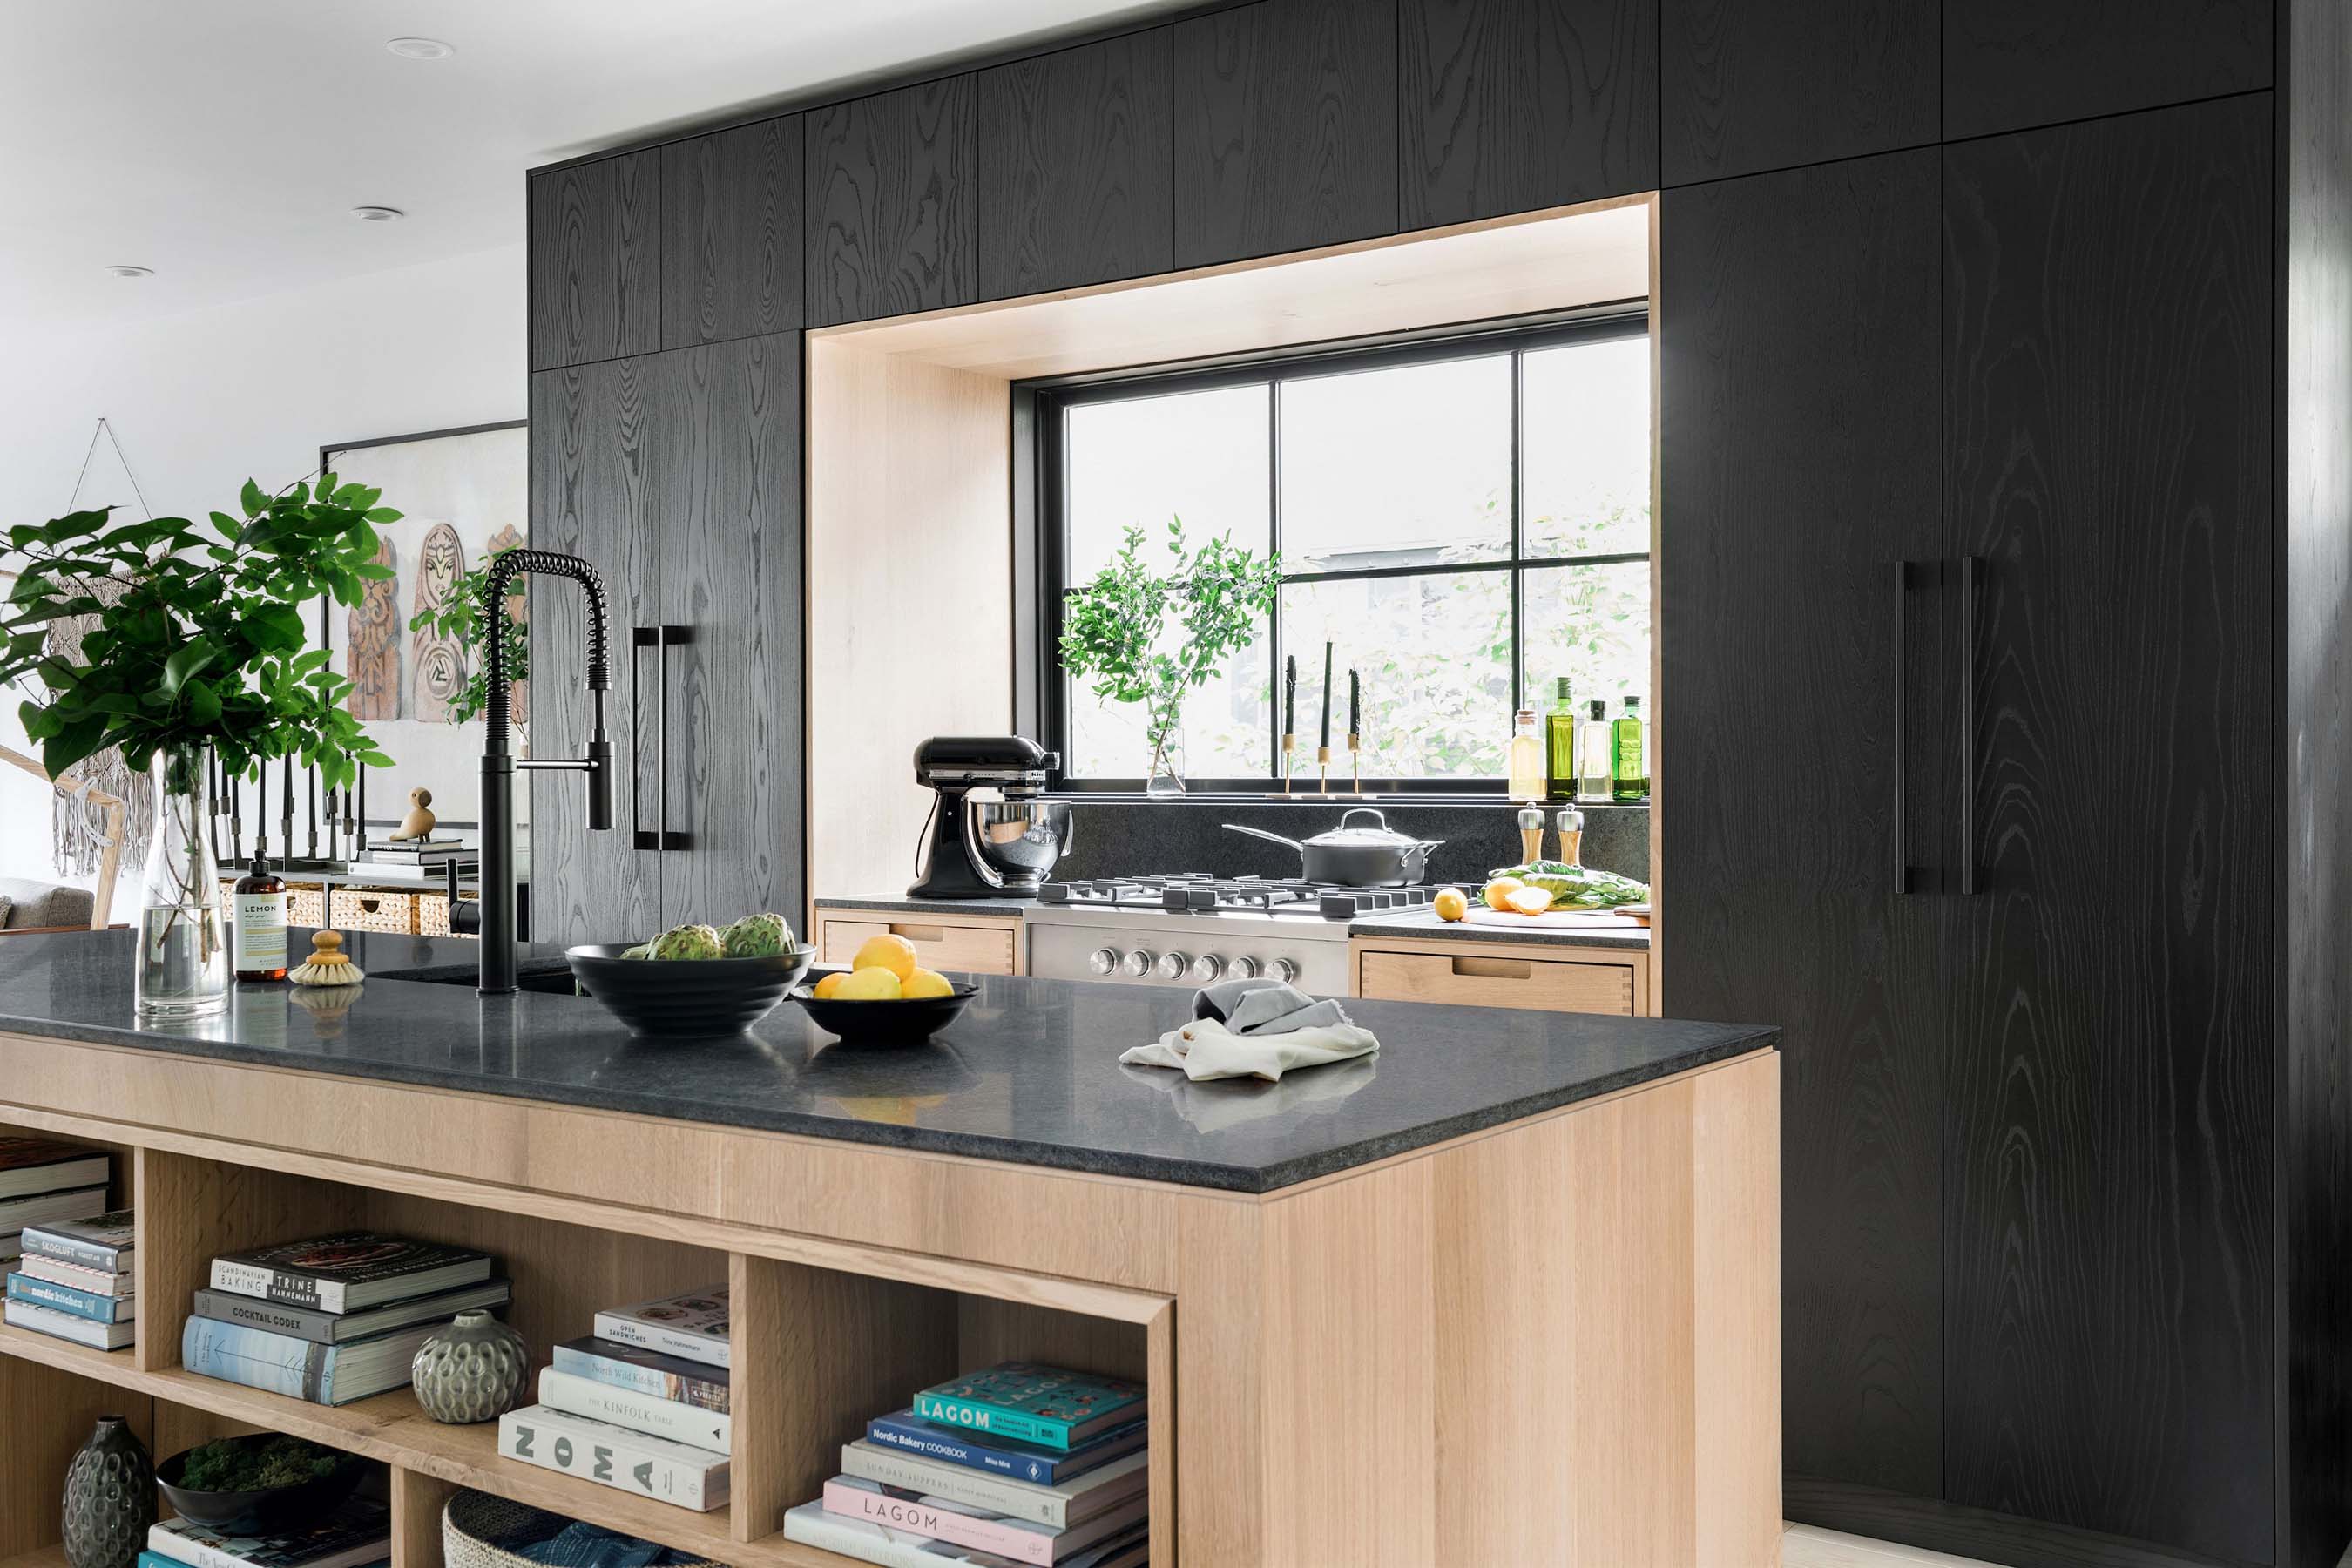 A perfect example of “less is more,” the kitchen of the HGTV Urban Oasis 2019 is modern and open, featuring floor-to-ceiling cabinetry with integrated storage, a concealed refrigerator, and a massive island with two dishwasher drawers.